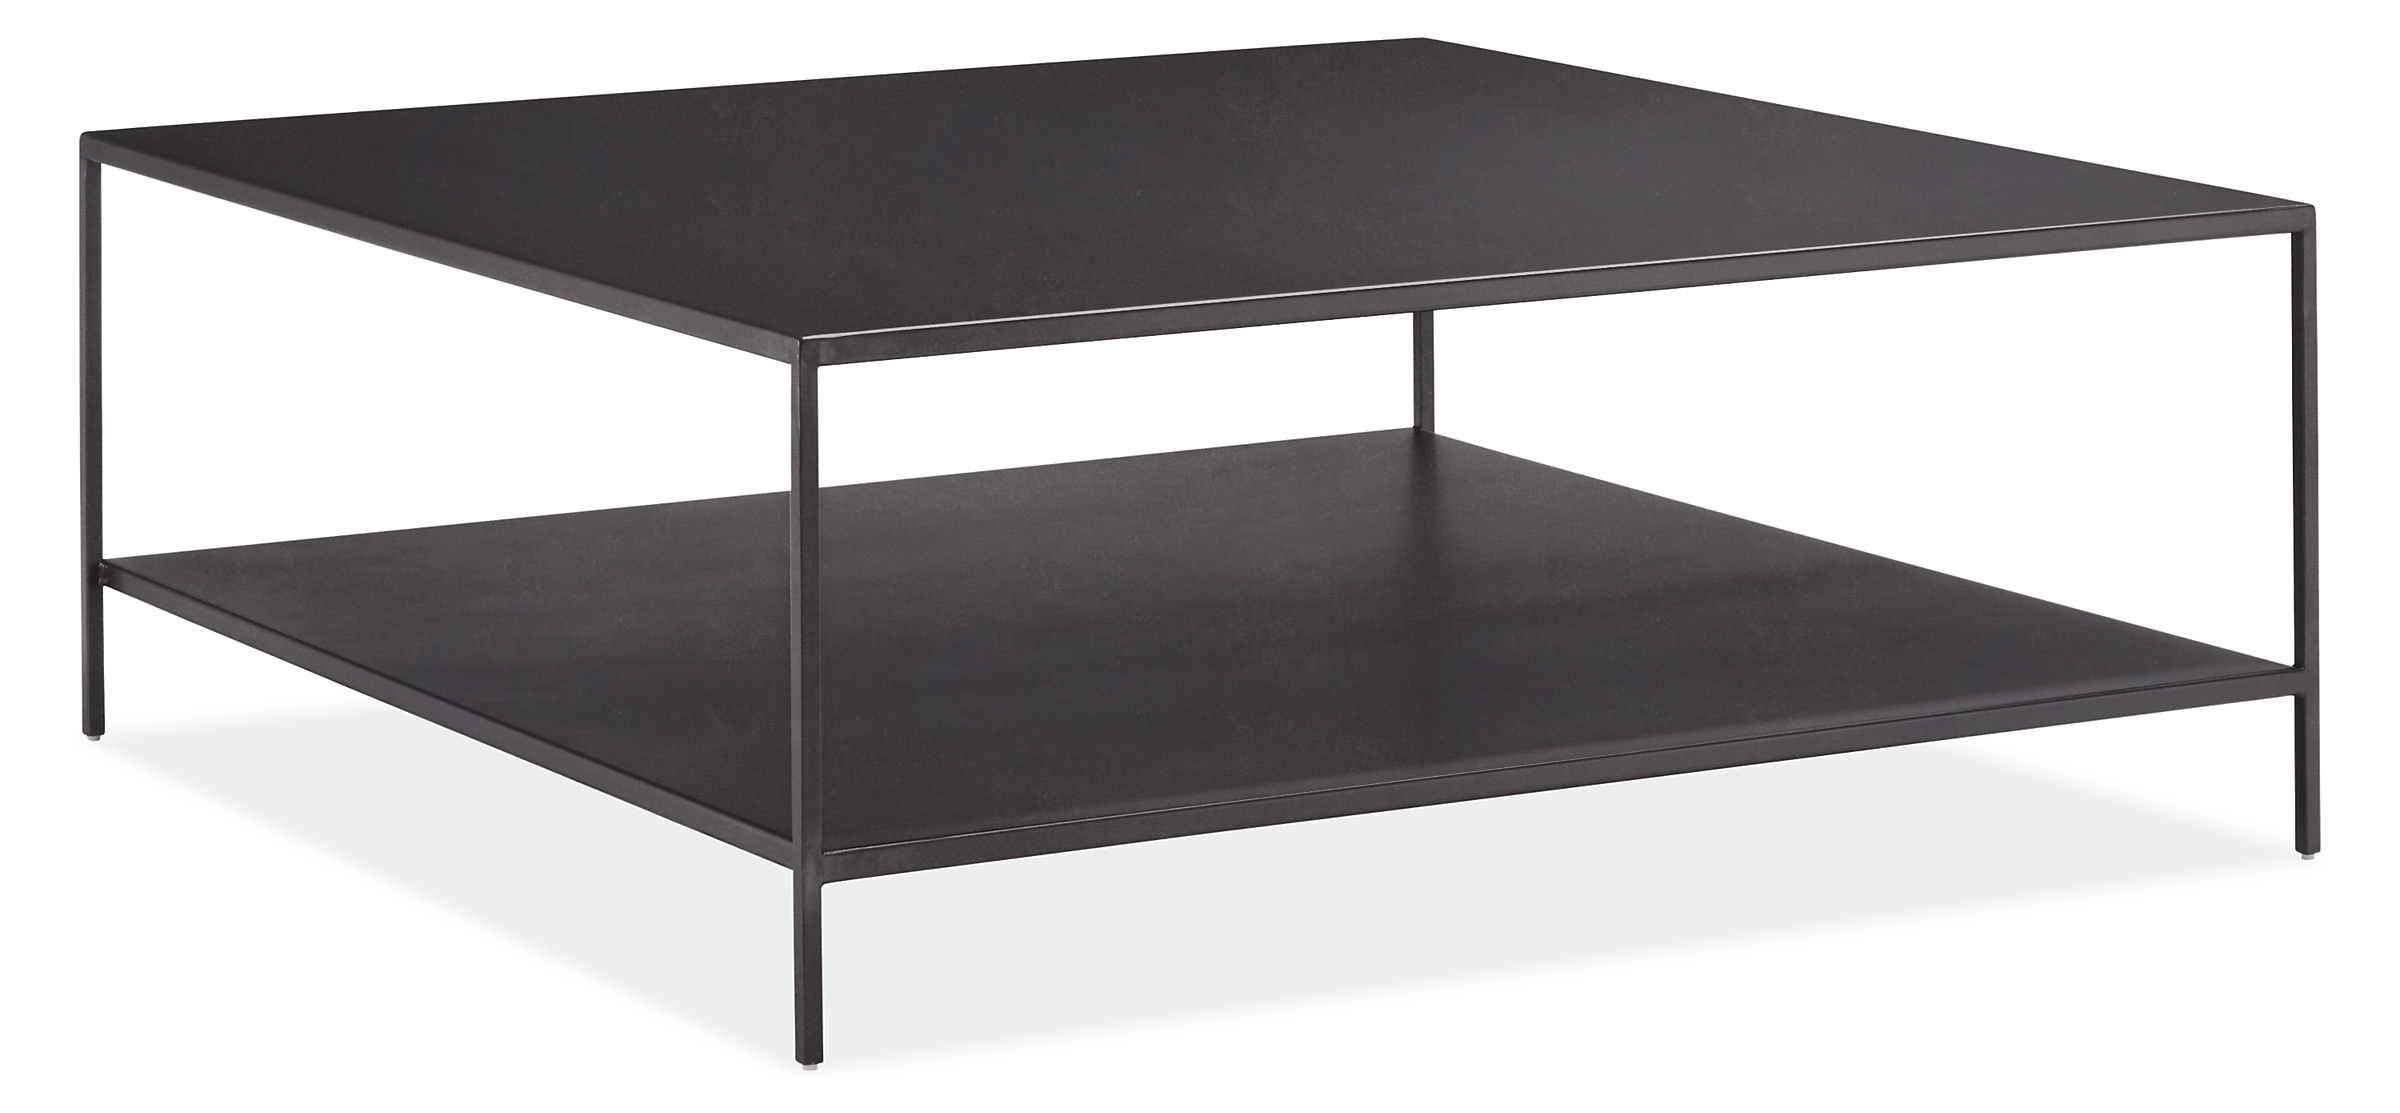 Slim 42w 42d 16h Square Coffee Table With Shelf